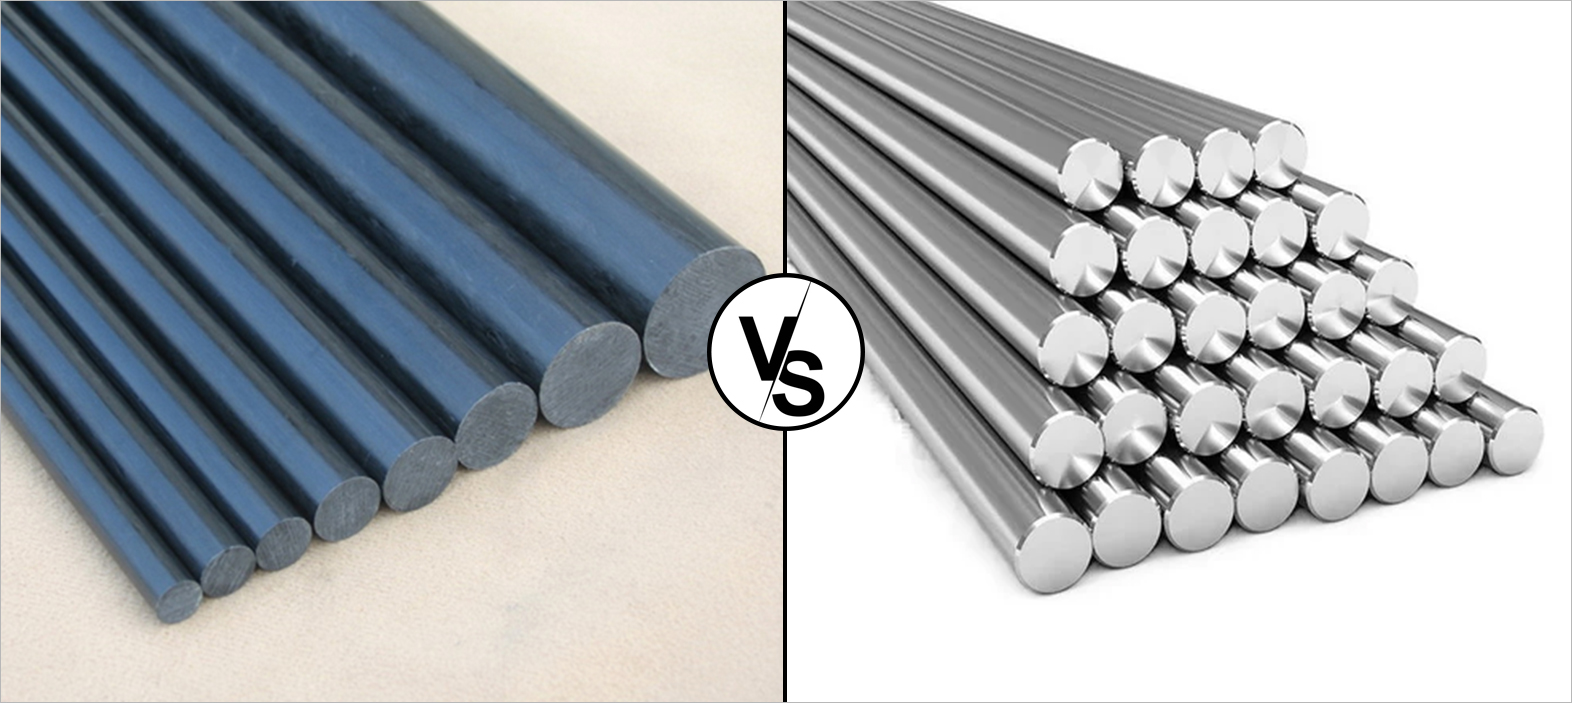 How Strong Is Carbon Steel?